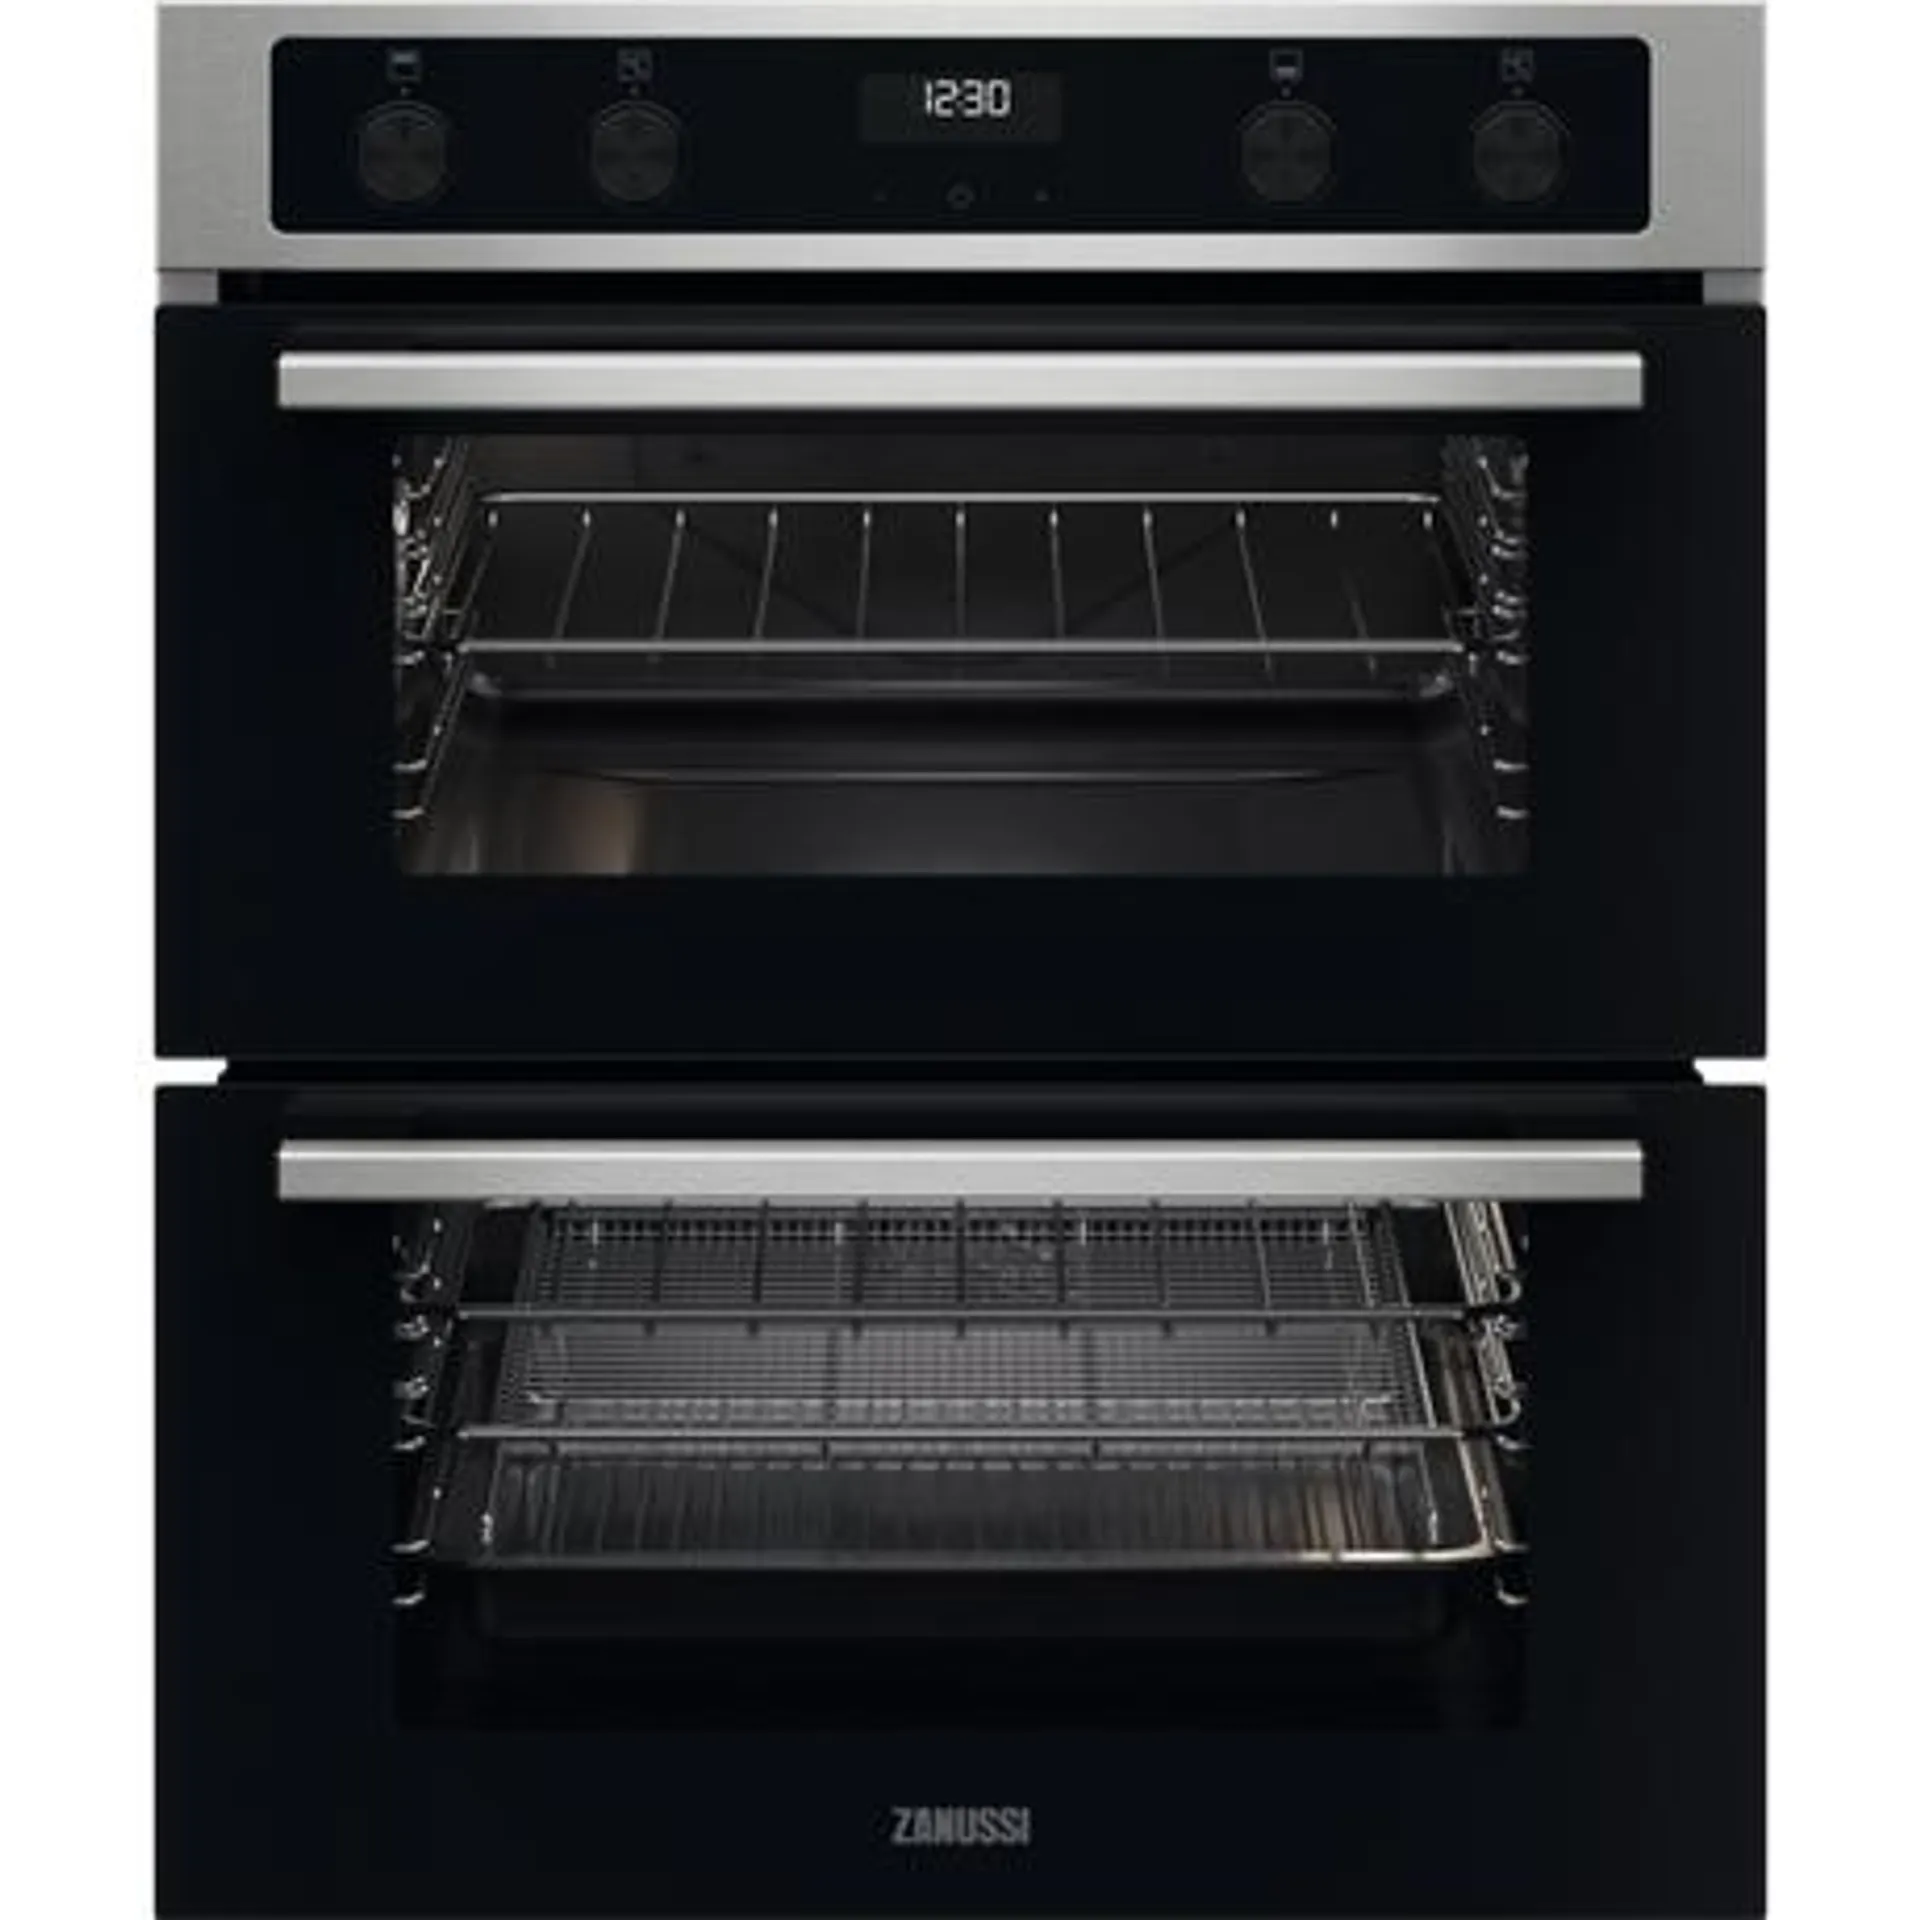 Zanussi ZPCNA4X1 59.4cm Built In Electric Double Oven - Stainless